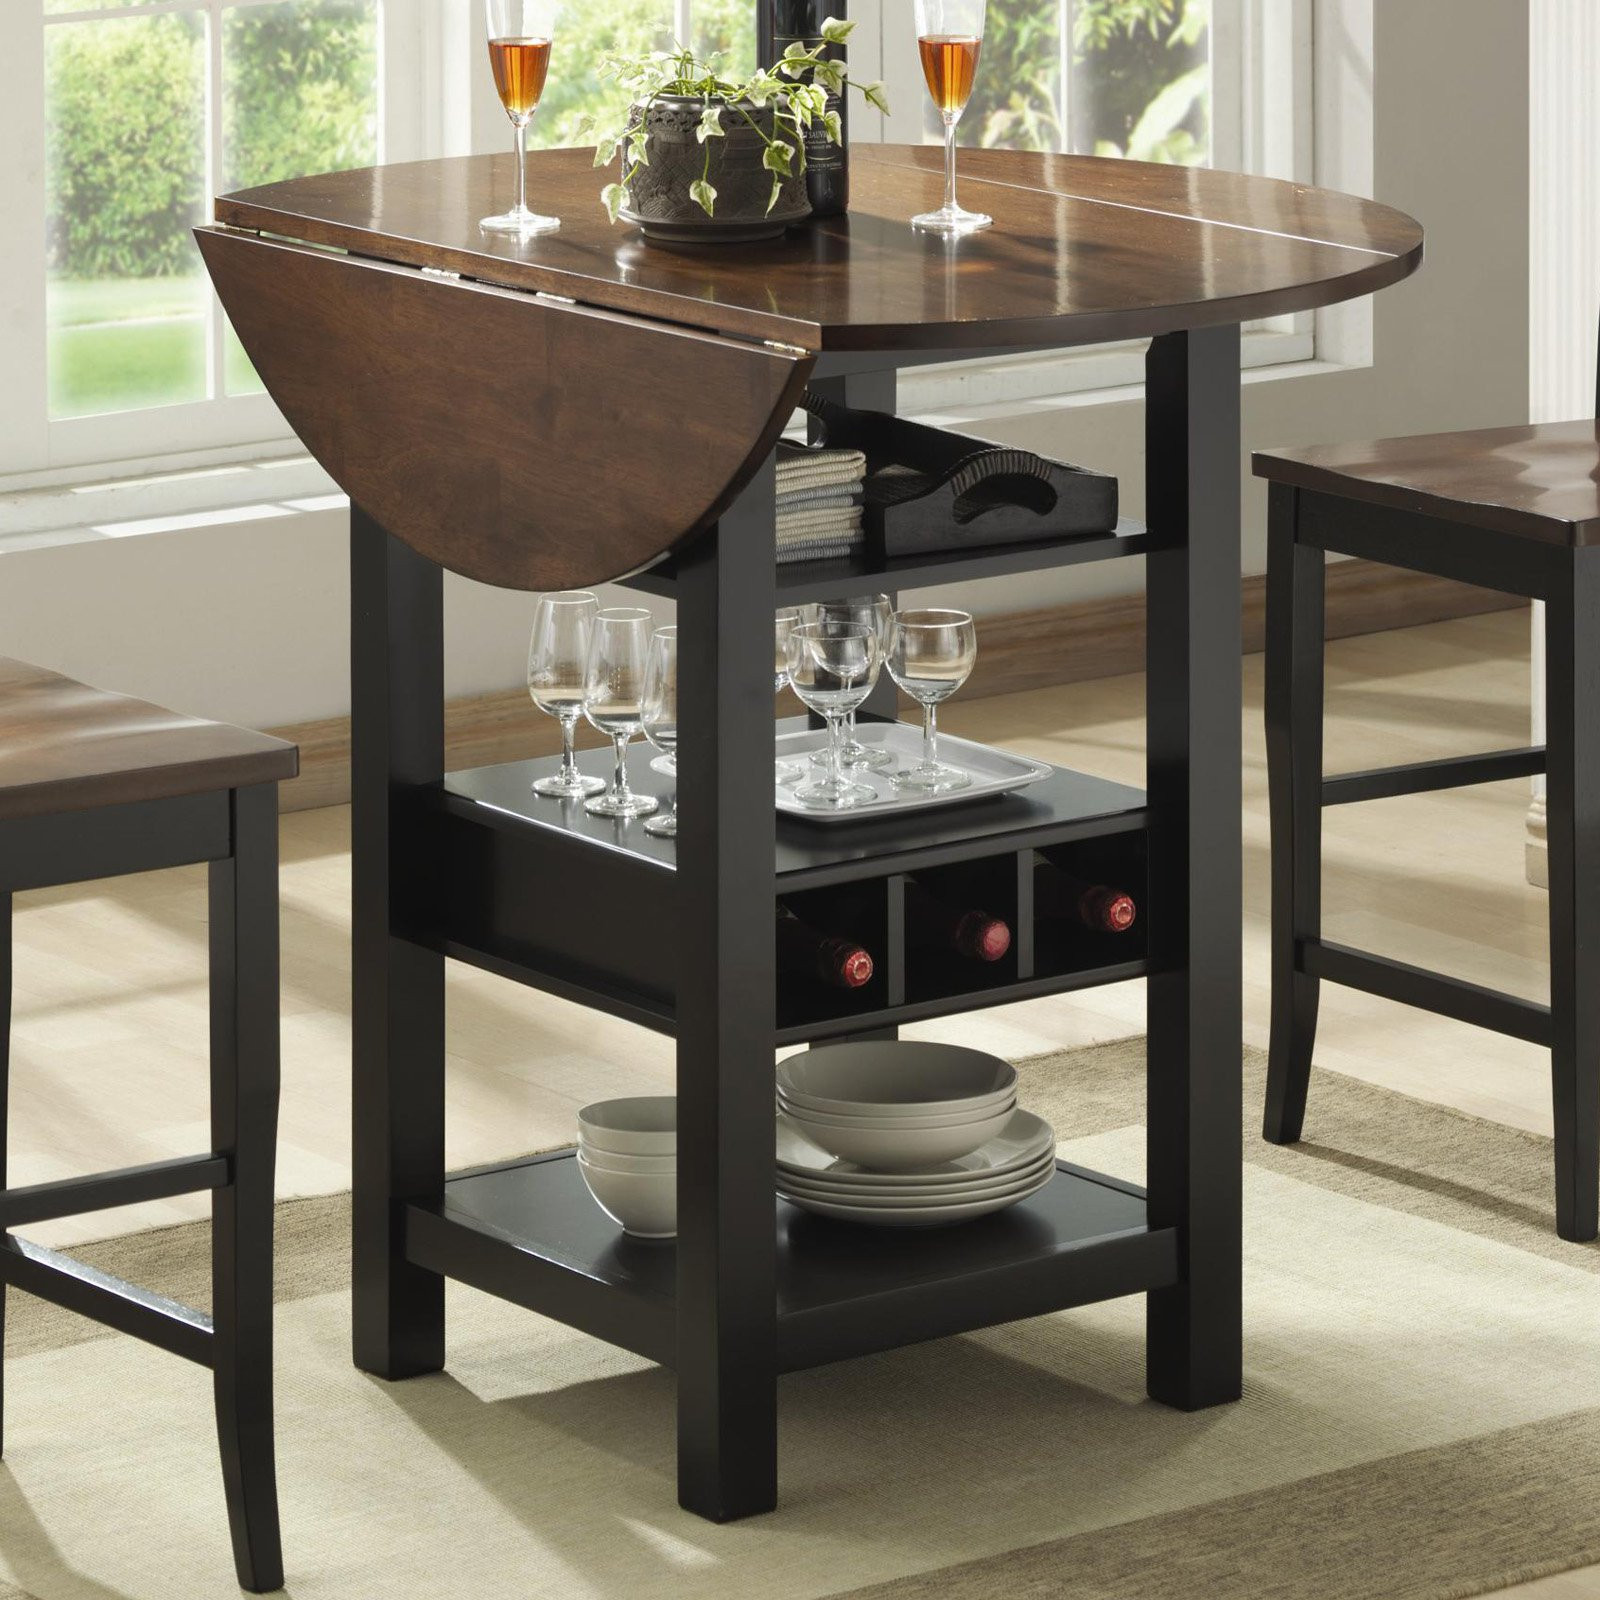 Counter Height Small Kitchen Table
 Ridgewood Counter Height Drop Leaf Dining Table with